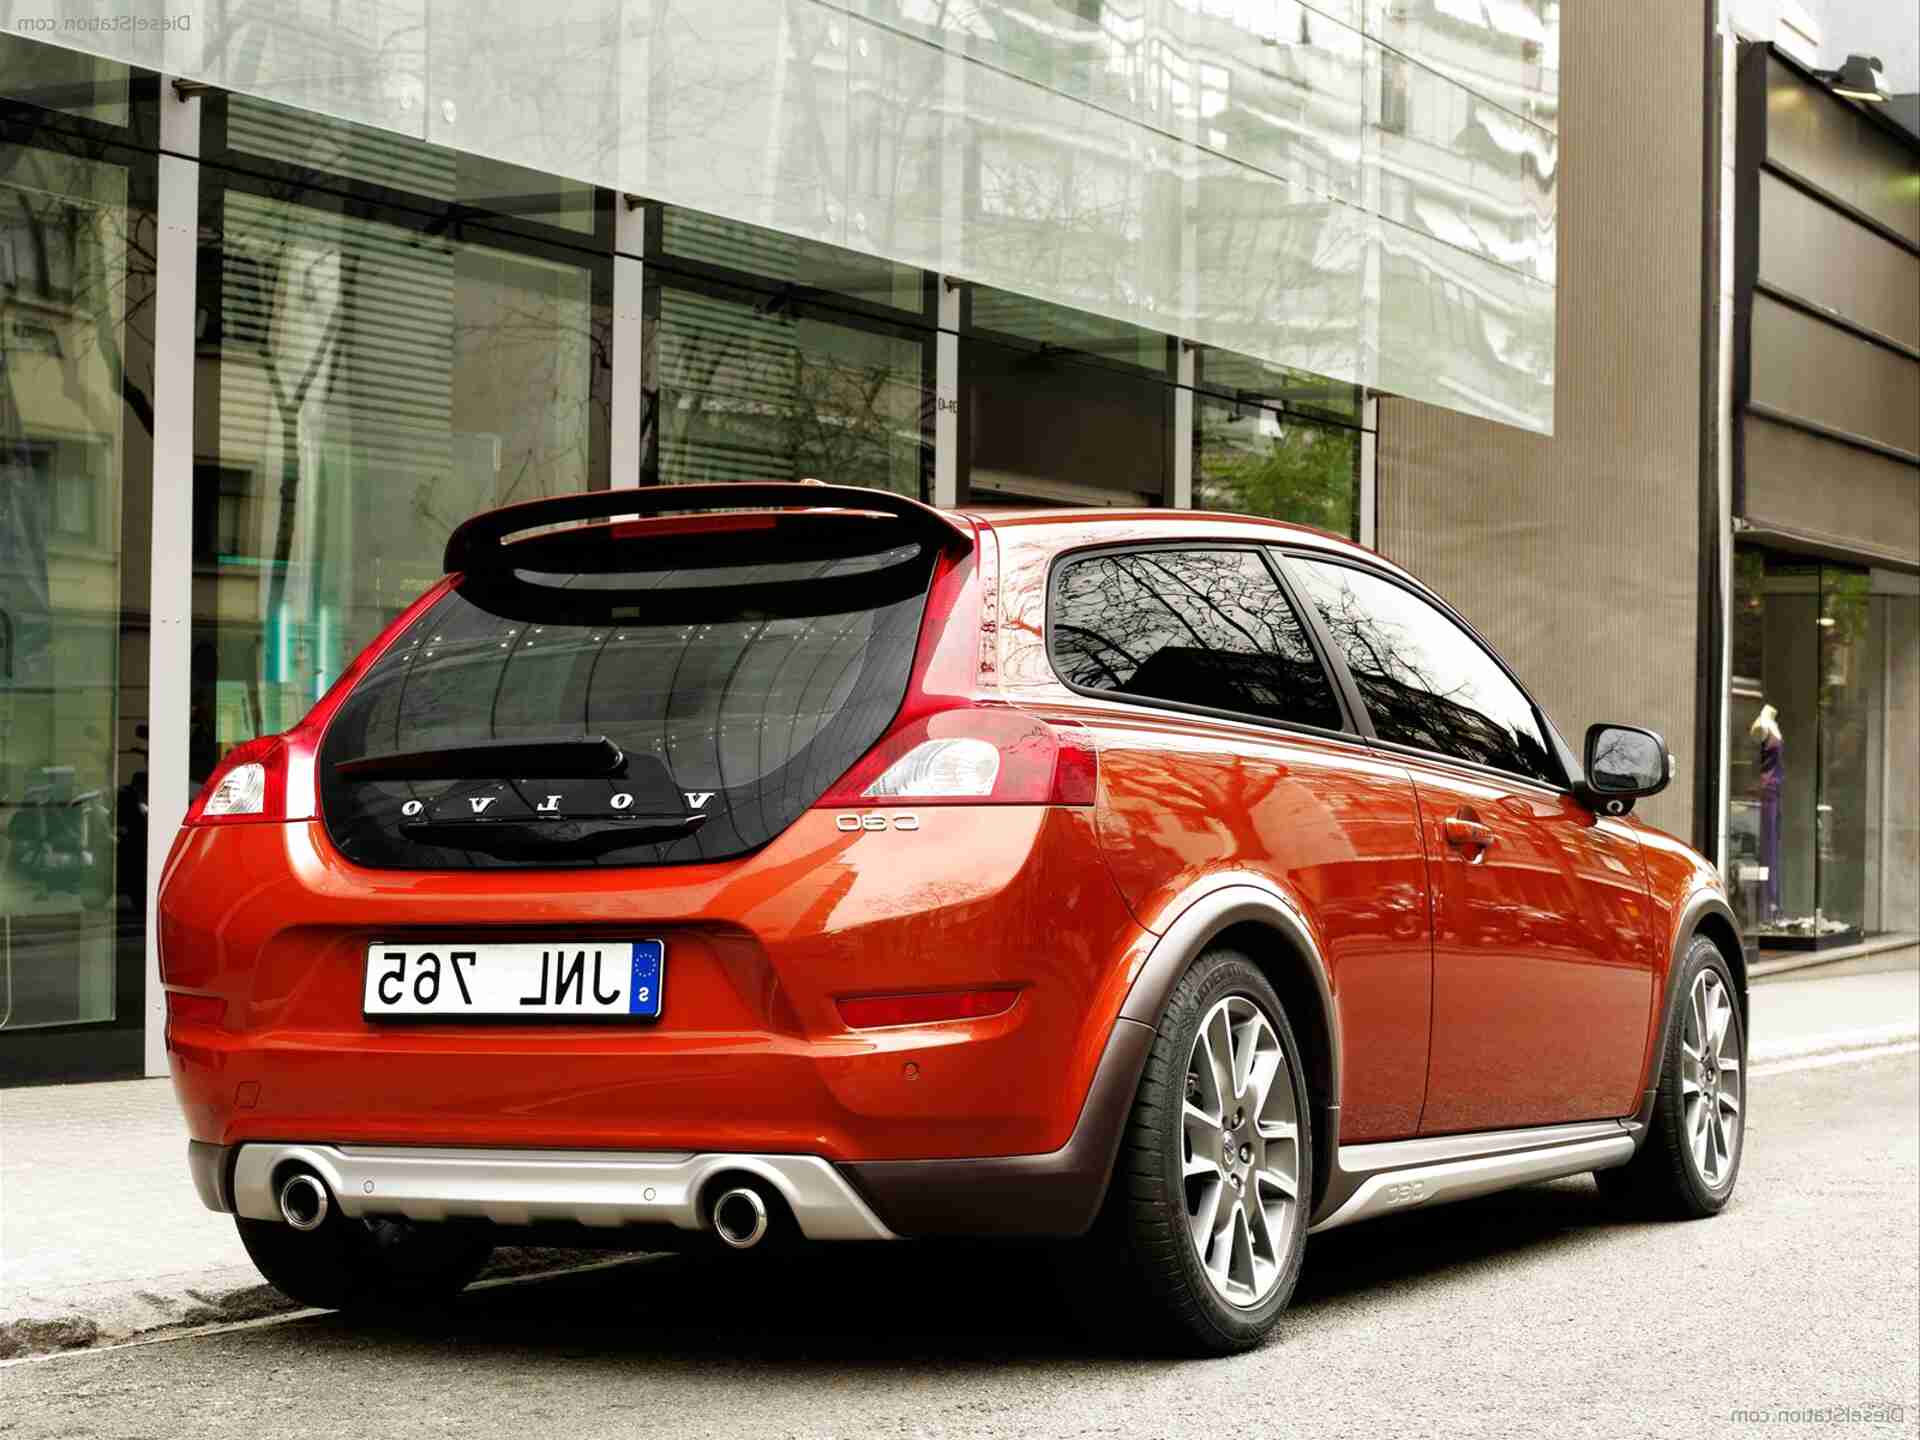 Volvo C30 2 5 T5 for sale in UK View 57 bargains